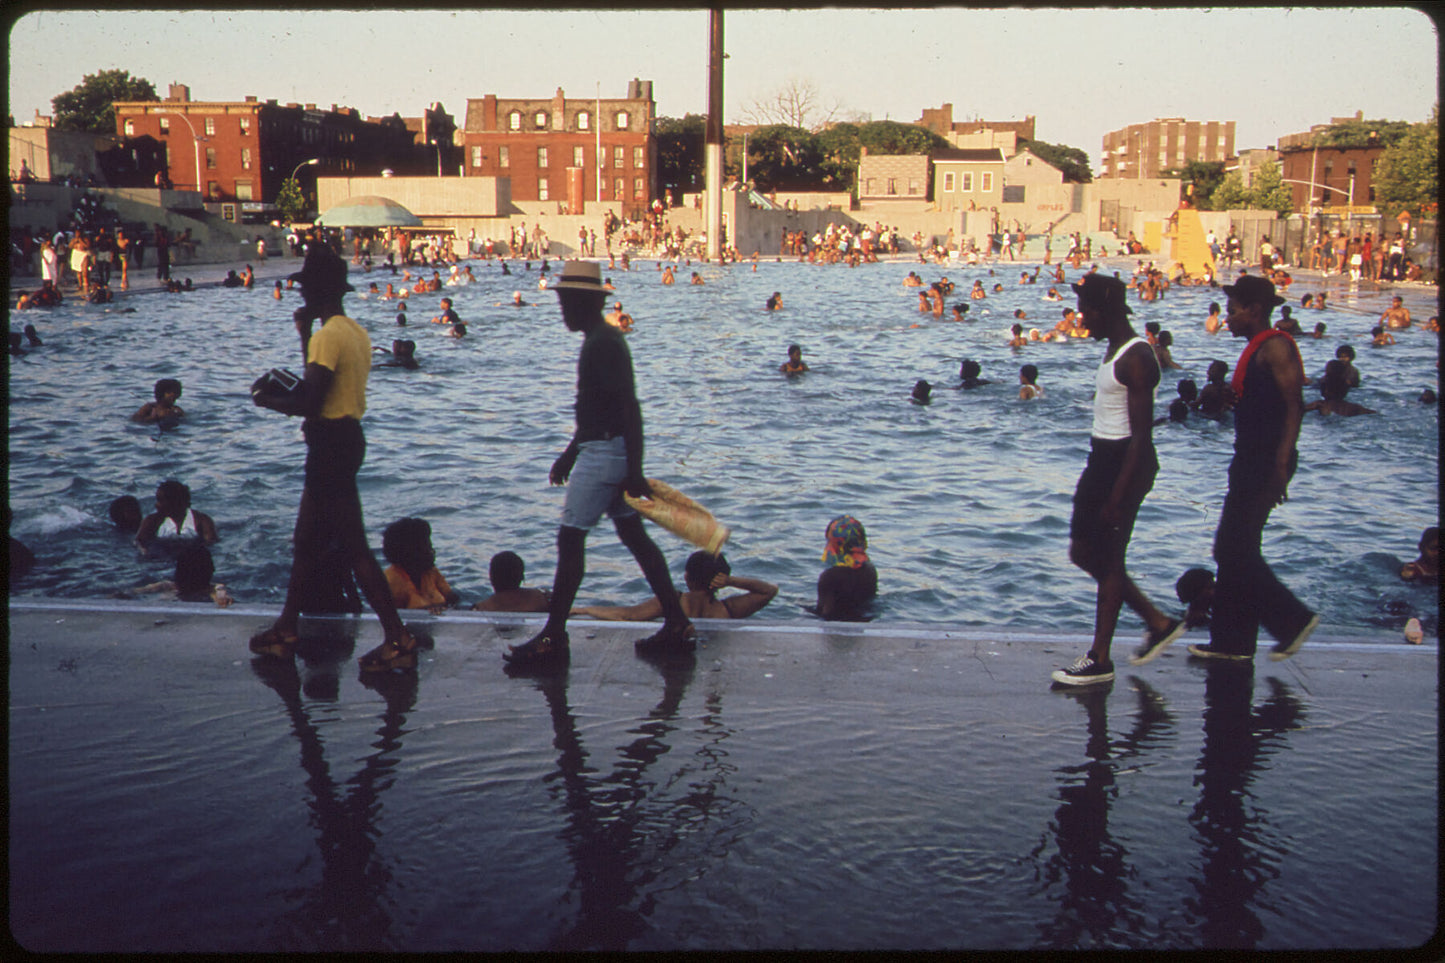 The Kosciusko Public Swimming Pool in the Heart of the Bedford-Stuyvesant District of Brooklyn in New York City by Danny Lyon, 1942